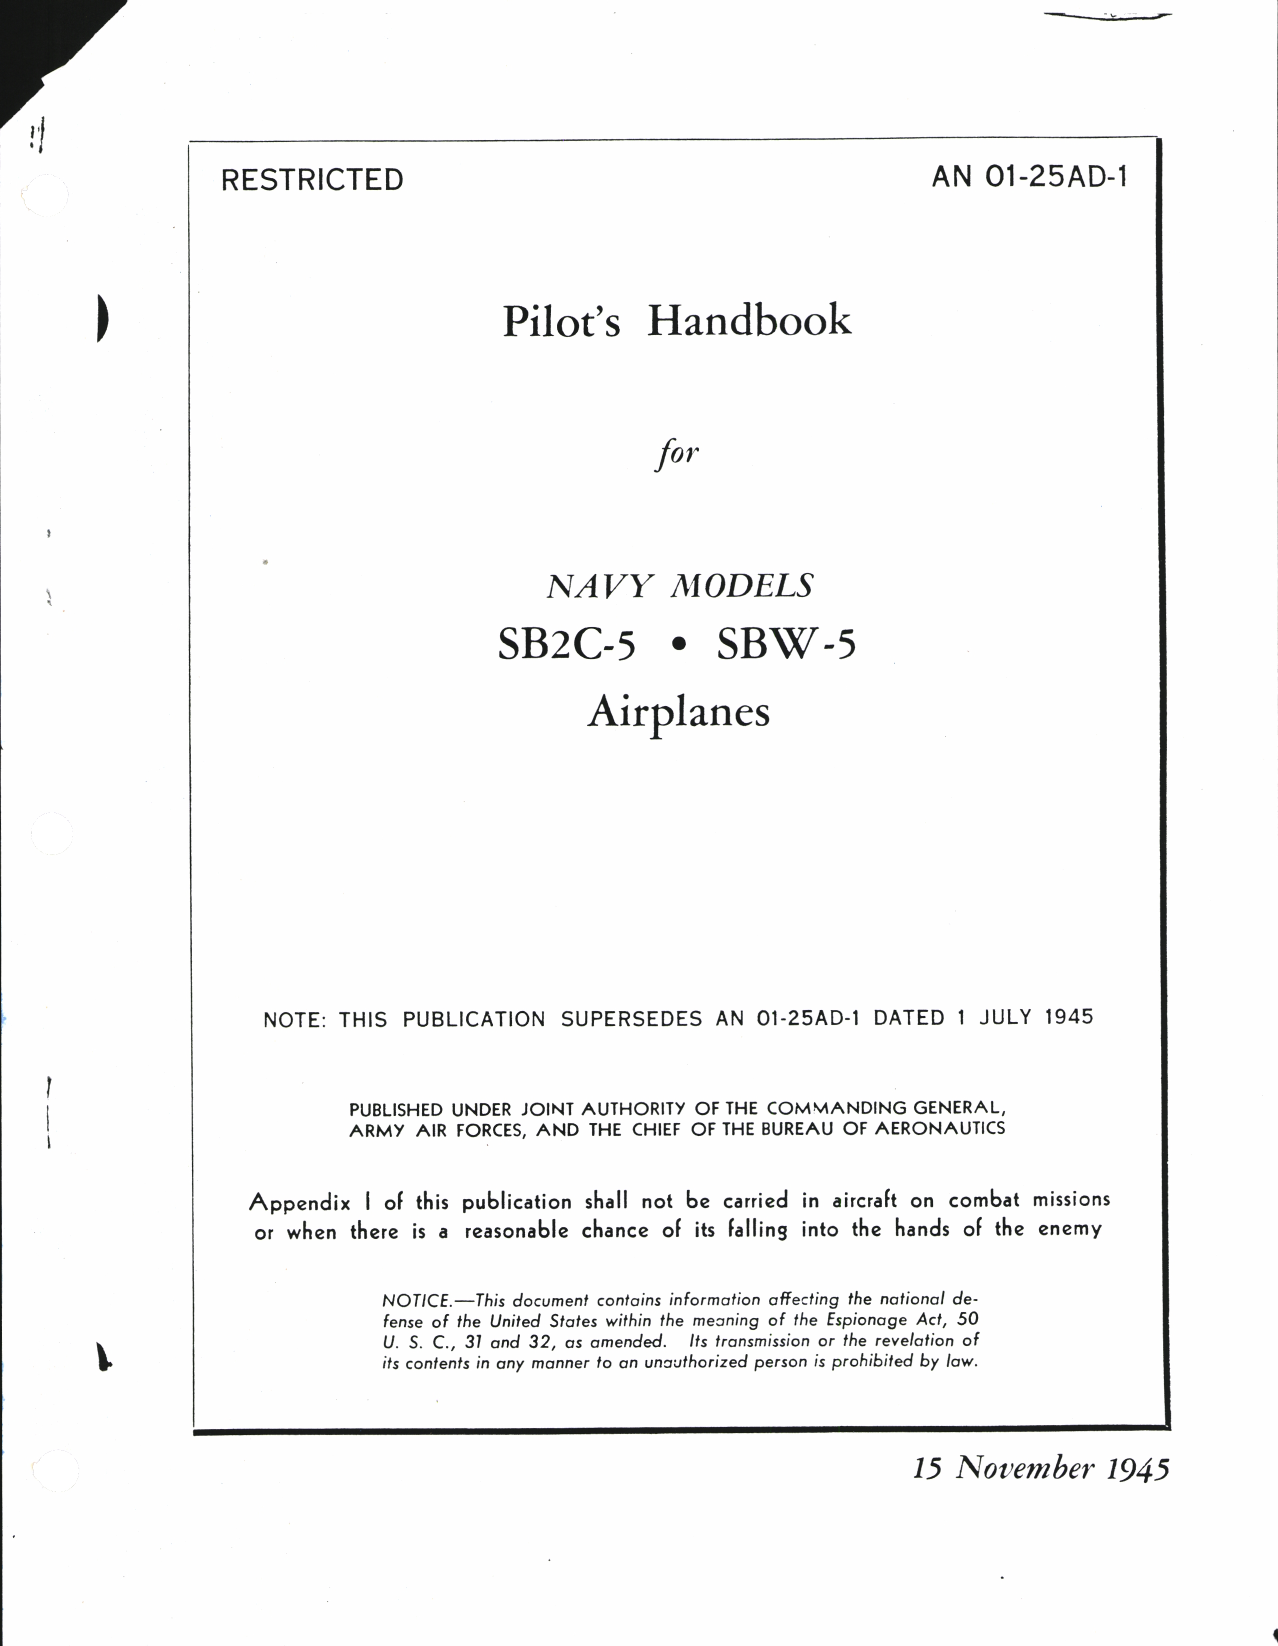 Sample page 1 from AirCorps Library document: Pilot's Handbook for Navy Models SB2-C and SBW-5 Airplanes